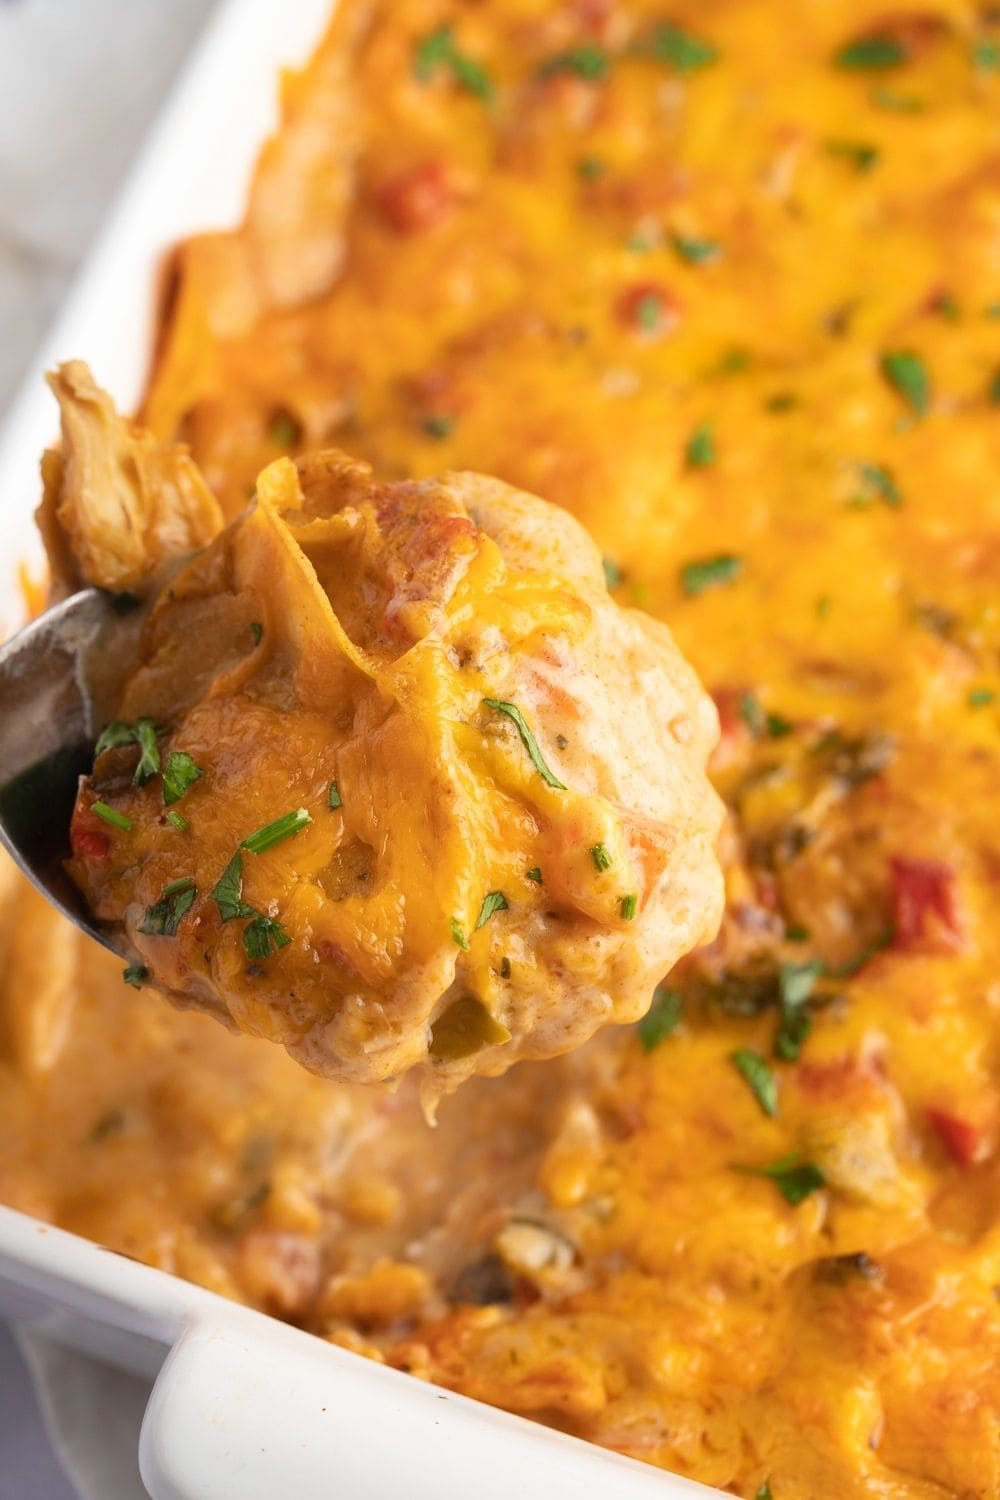 Closeup of A Spoon Scooping Cheesy King Ranch Chicken Casserole